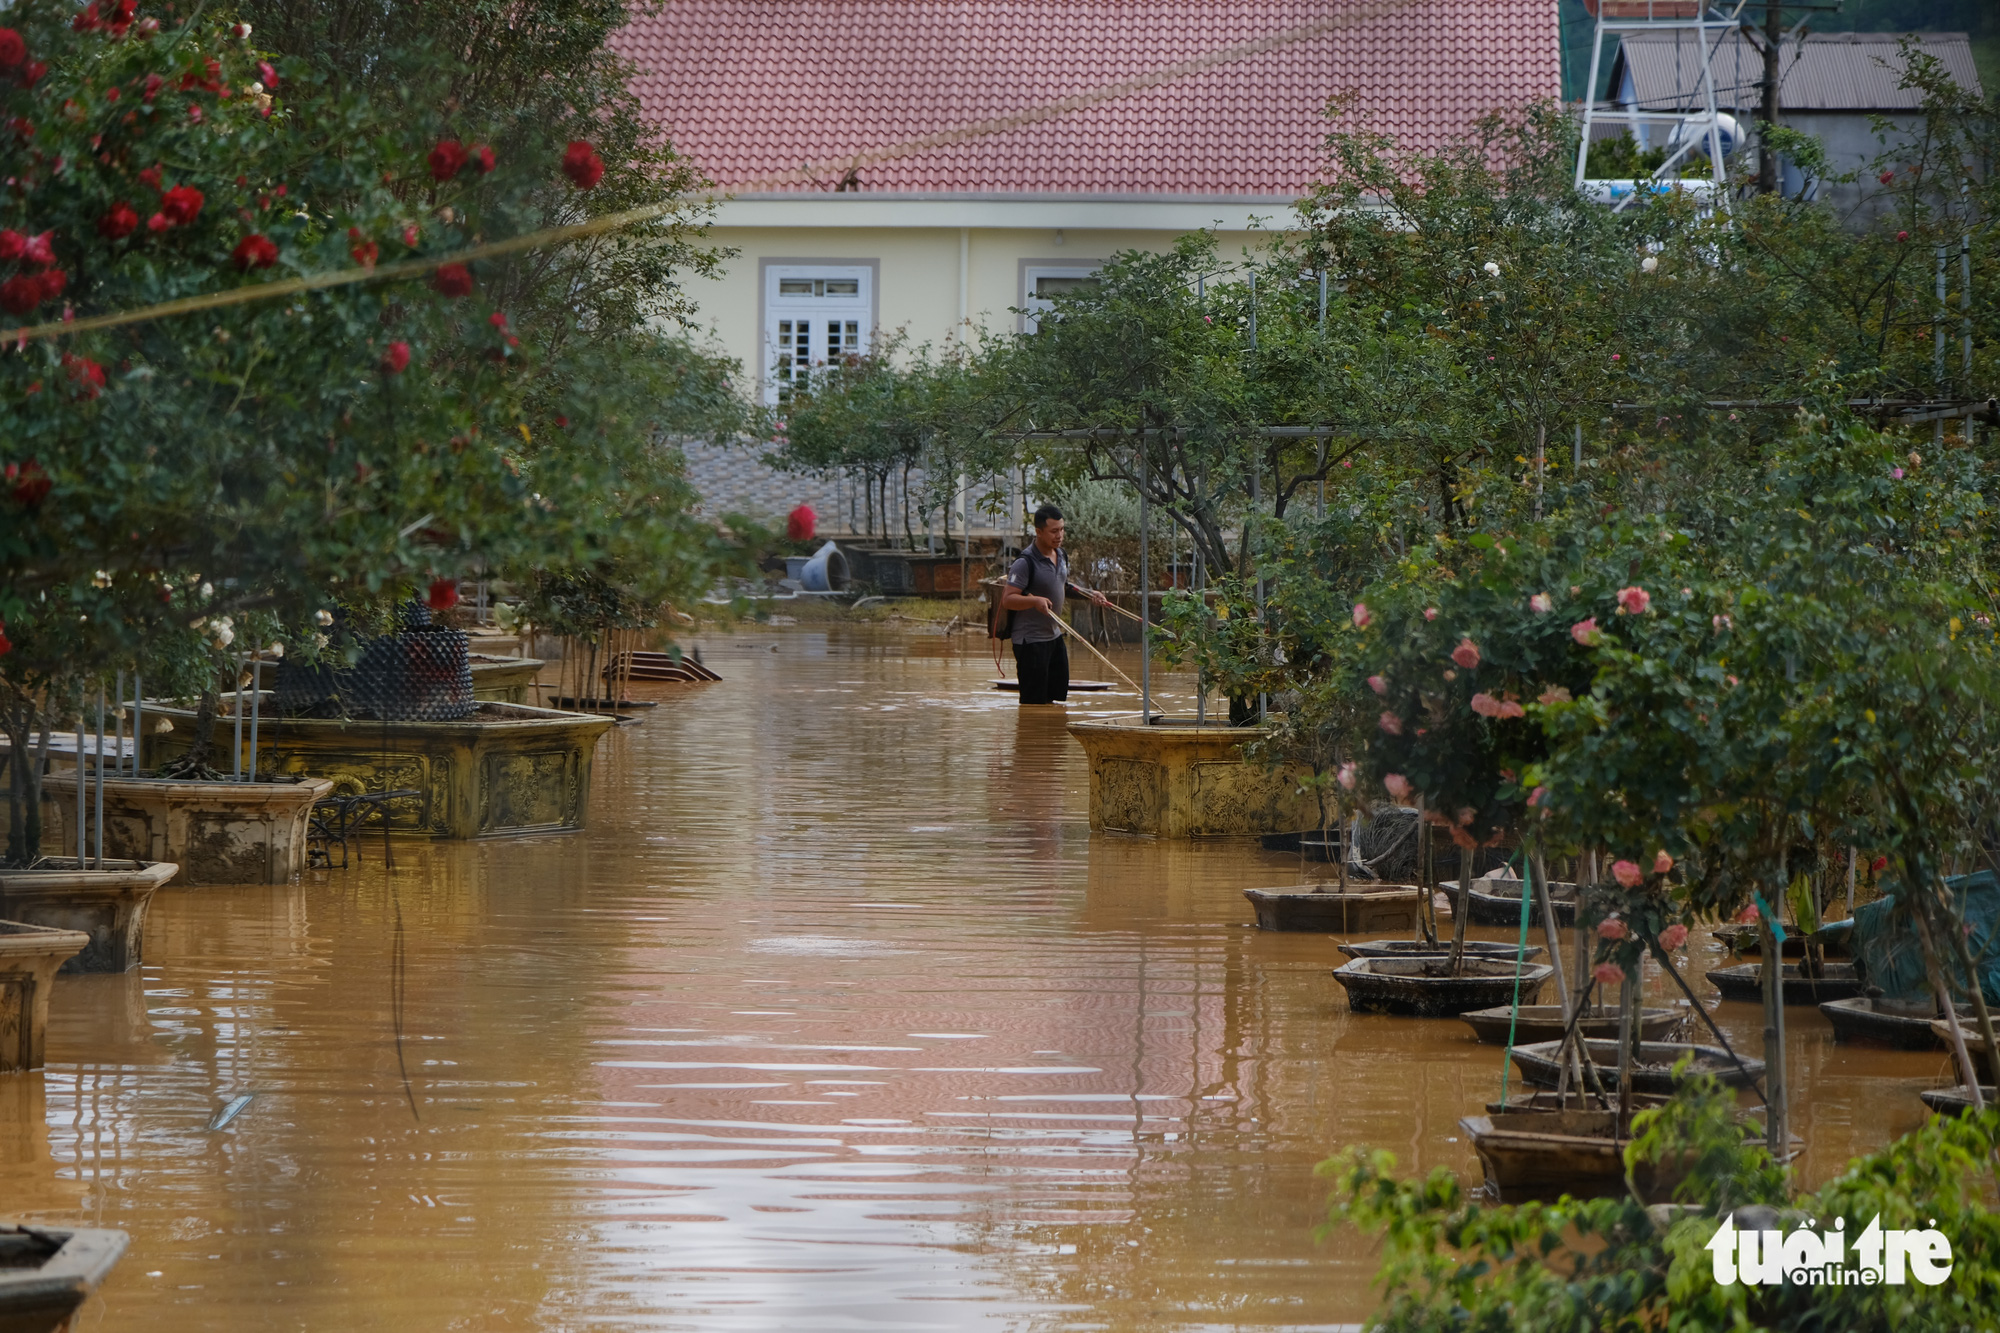 A man nets fish in his flooded garden in Duc Trong District, Lam Dong Province, Vietnam, July 9, 2021. Photo: M. Vinh / Tuoi Tre